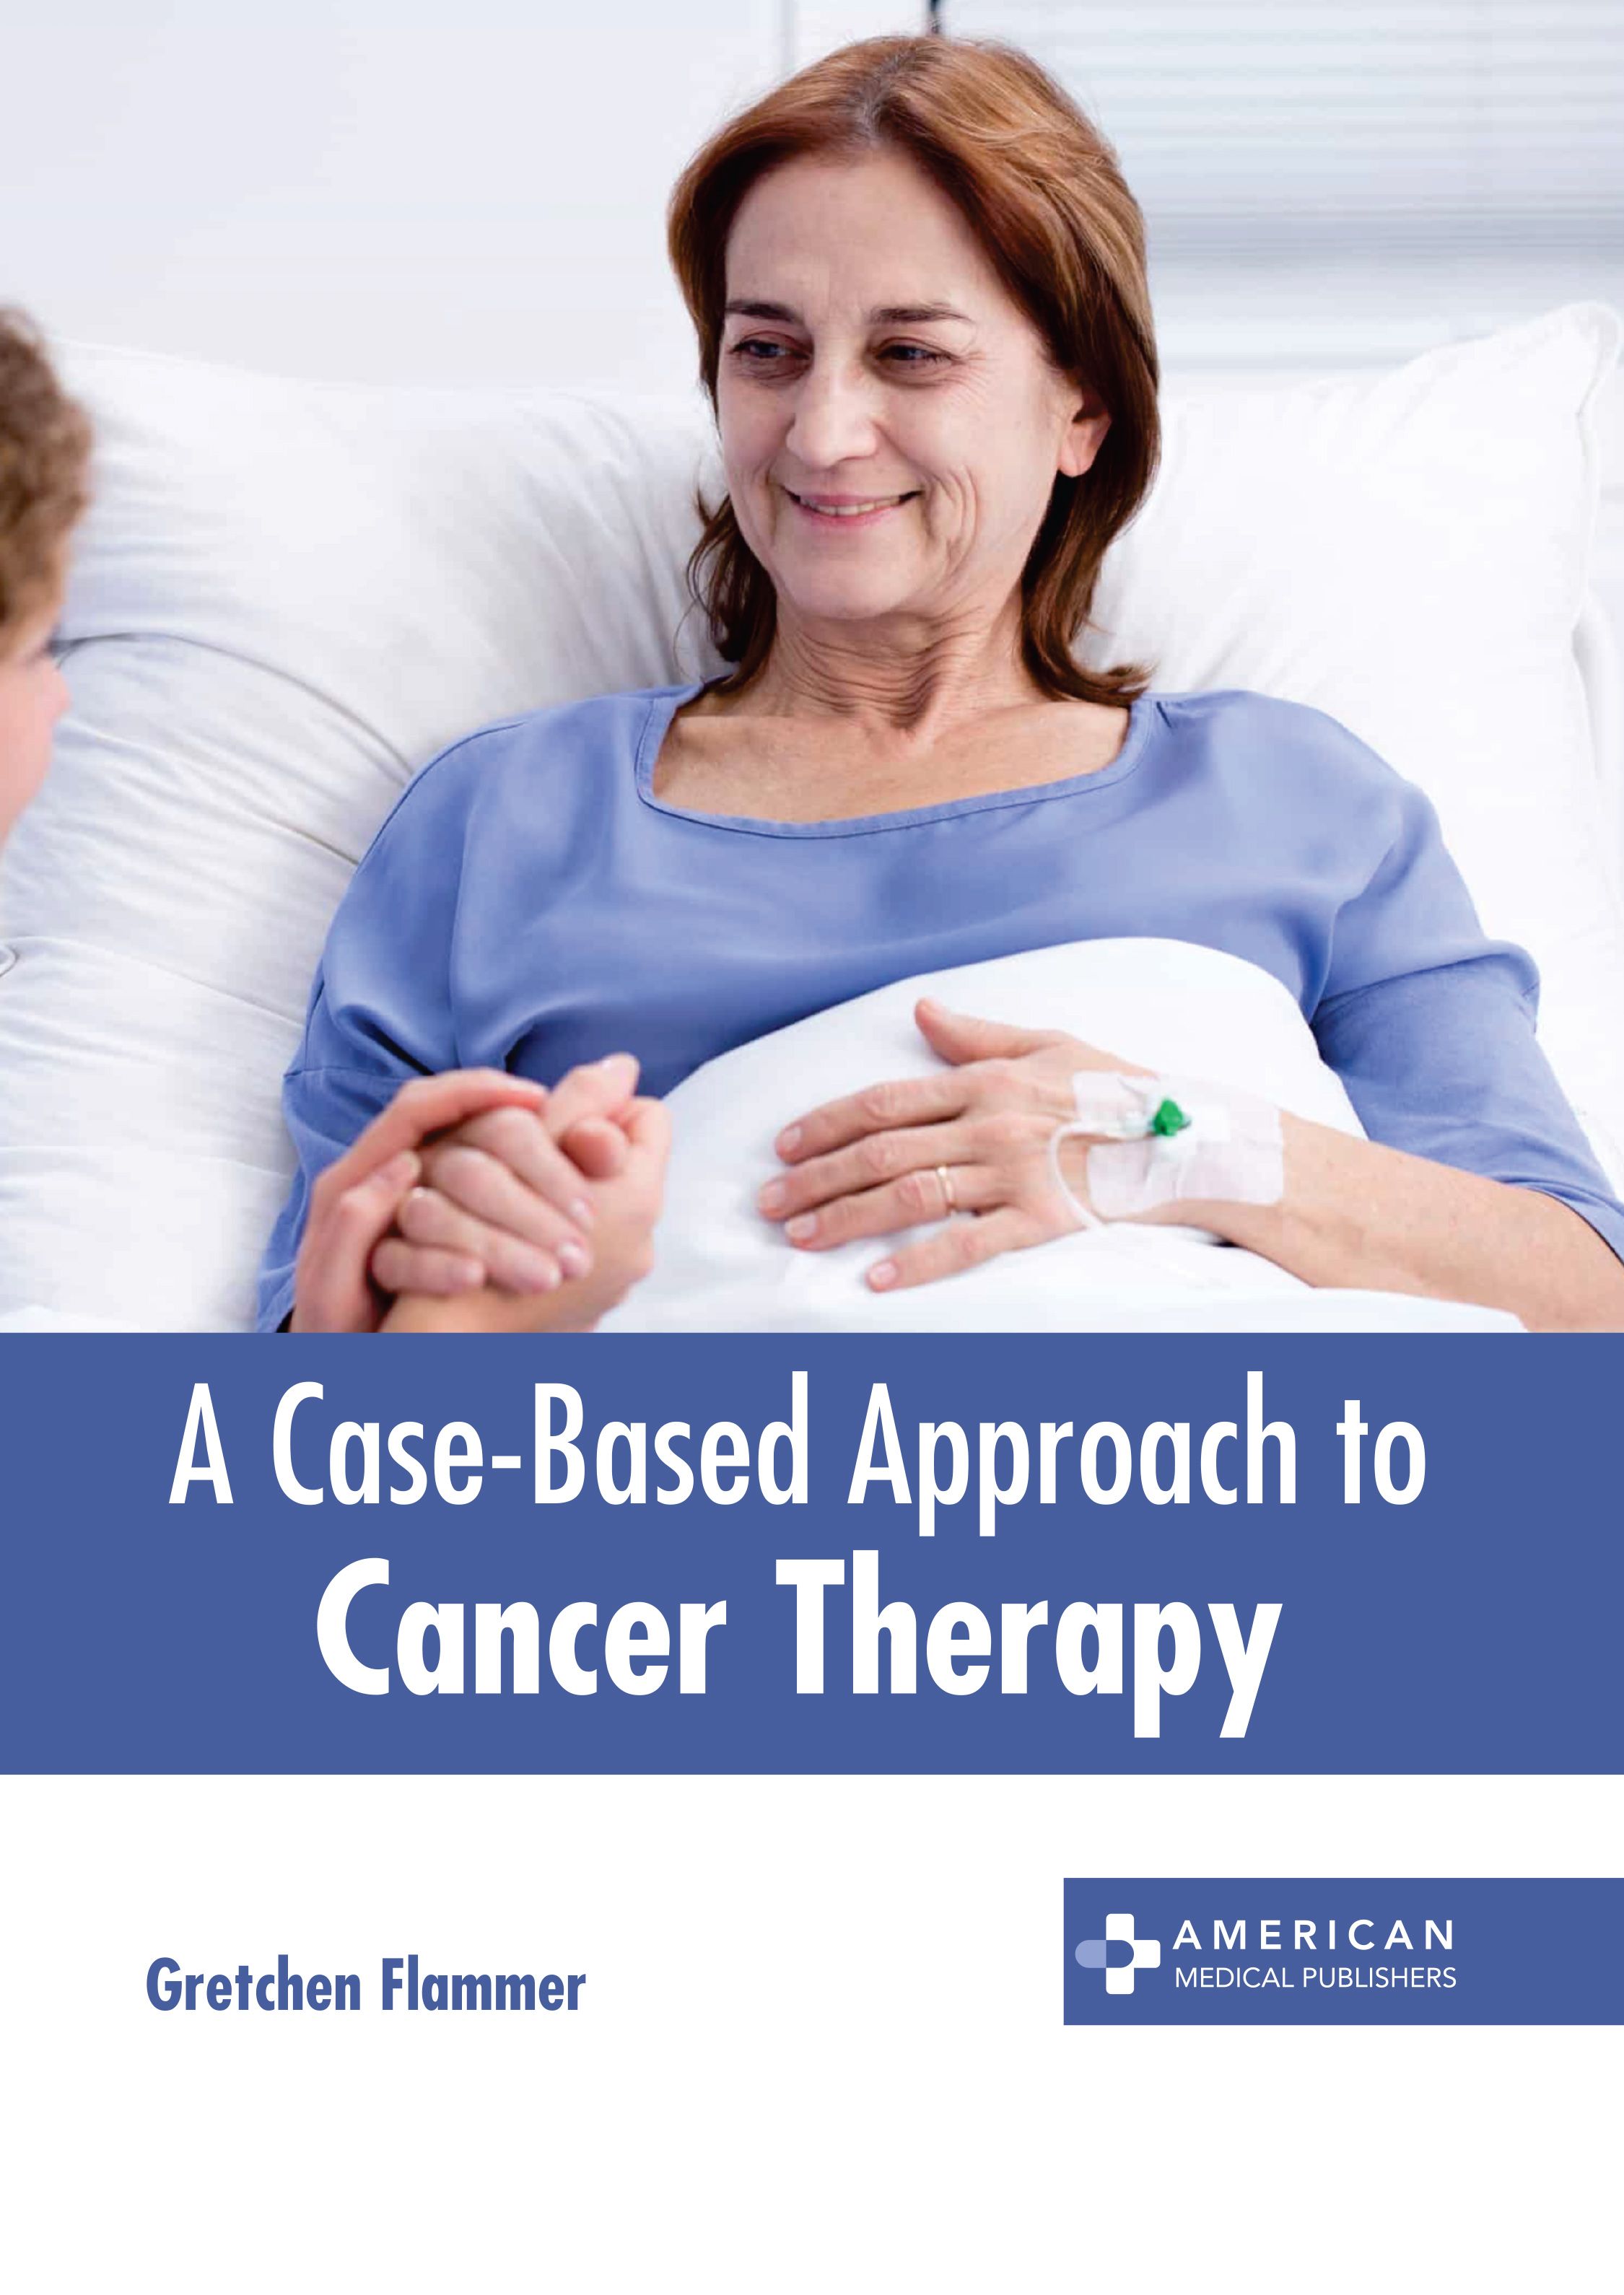 

exclusive-publishers/american-medical-publishers/a-case-based-approach-to-cancer-therapy-9781639276189